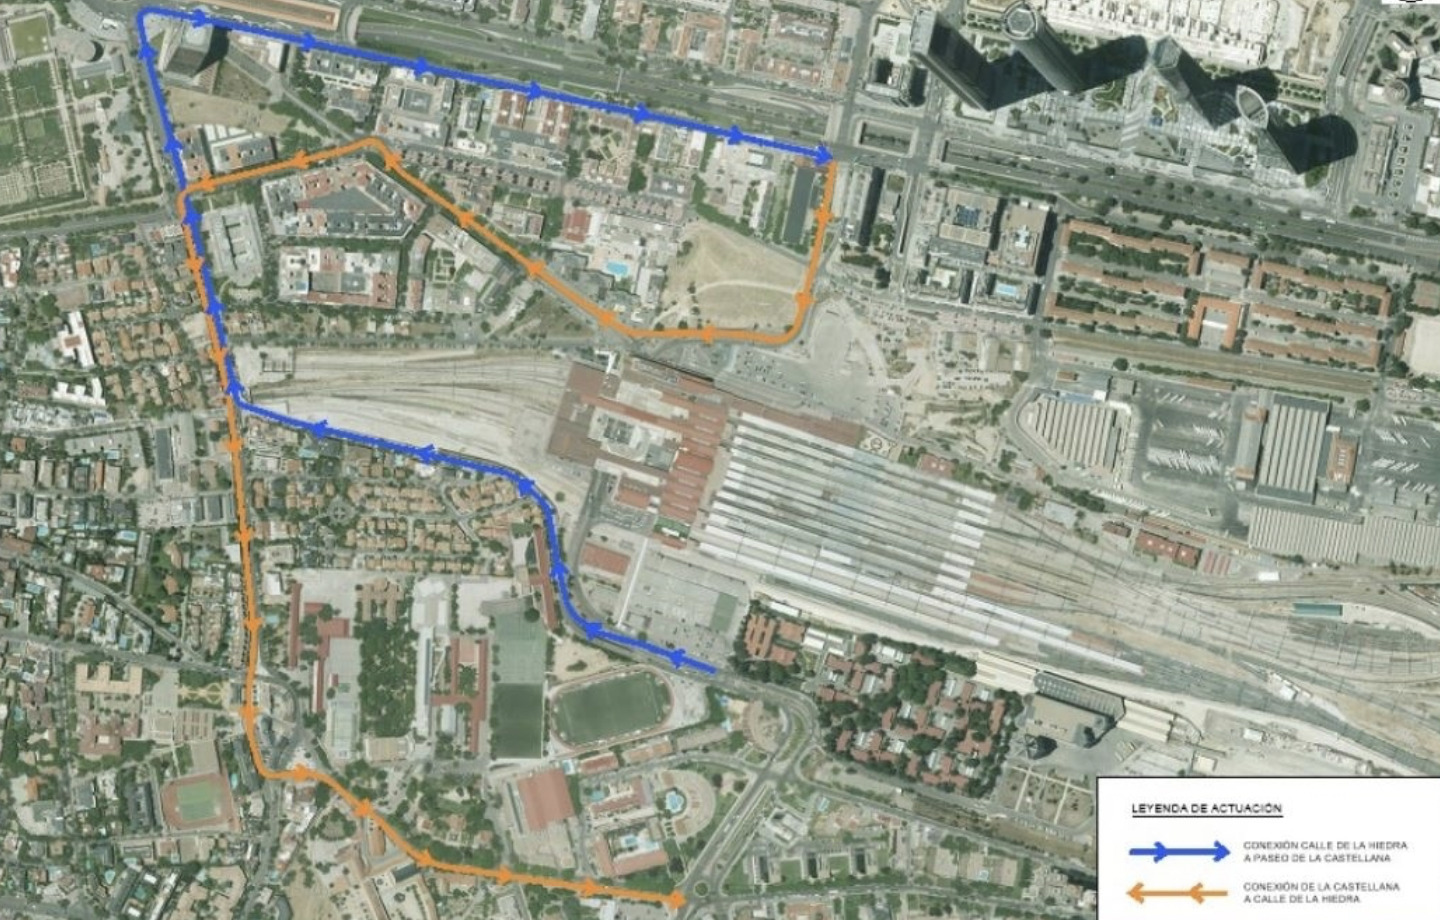 Adif begins new phase of work at Chamartín-Clara Campoamor station